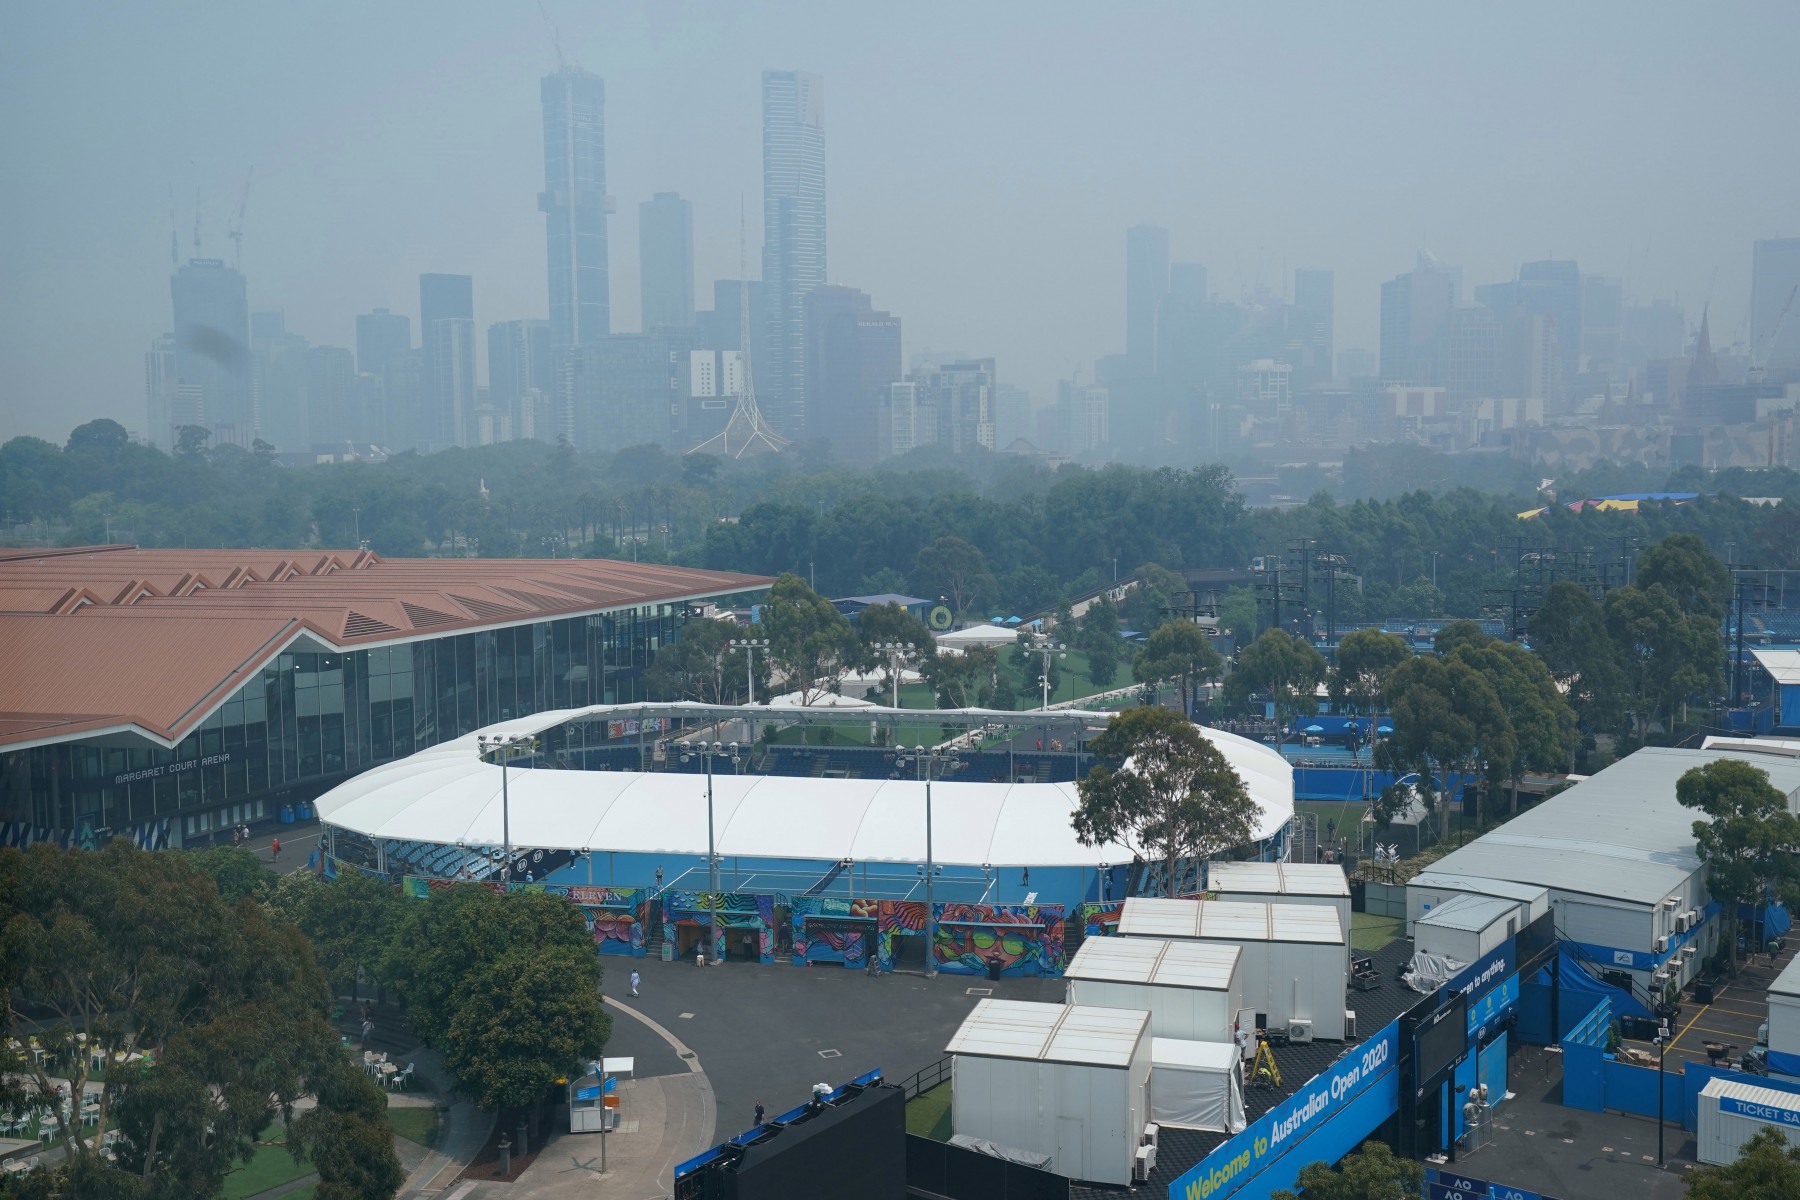 , Australian Open 2020 FREE: Live stream, TV channel, full schedule and bushfire info ahead of first Slam of the year